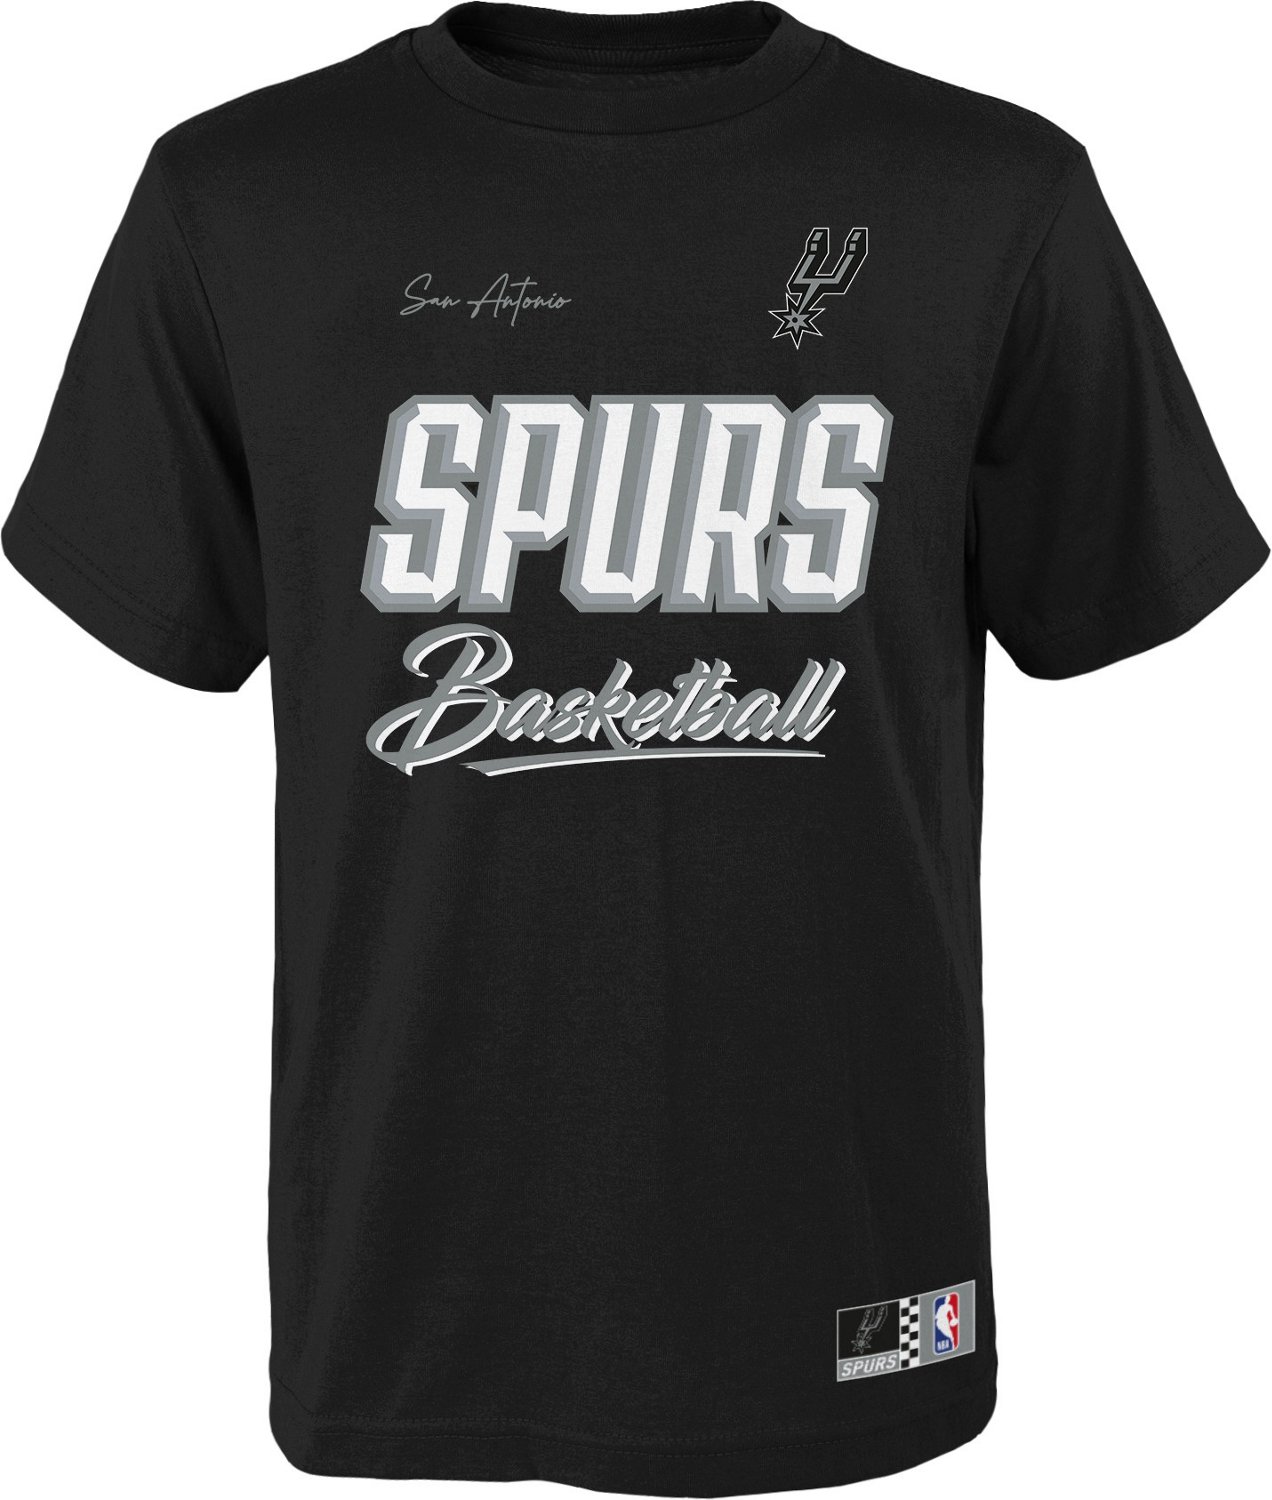 Where to Buy the BEST Spurs Gear in San Antonio – UNATION